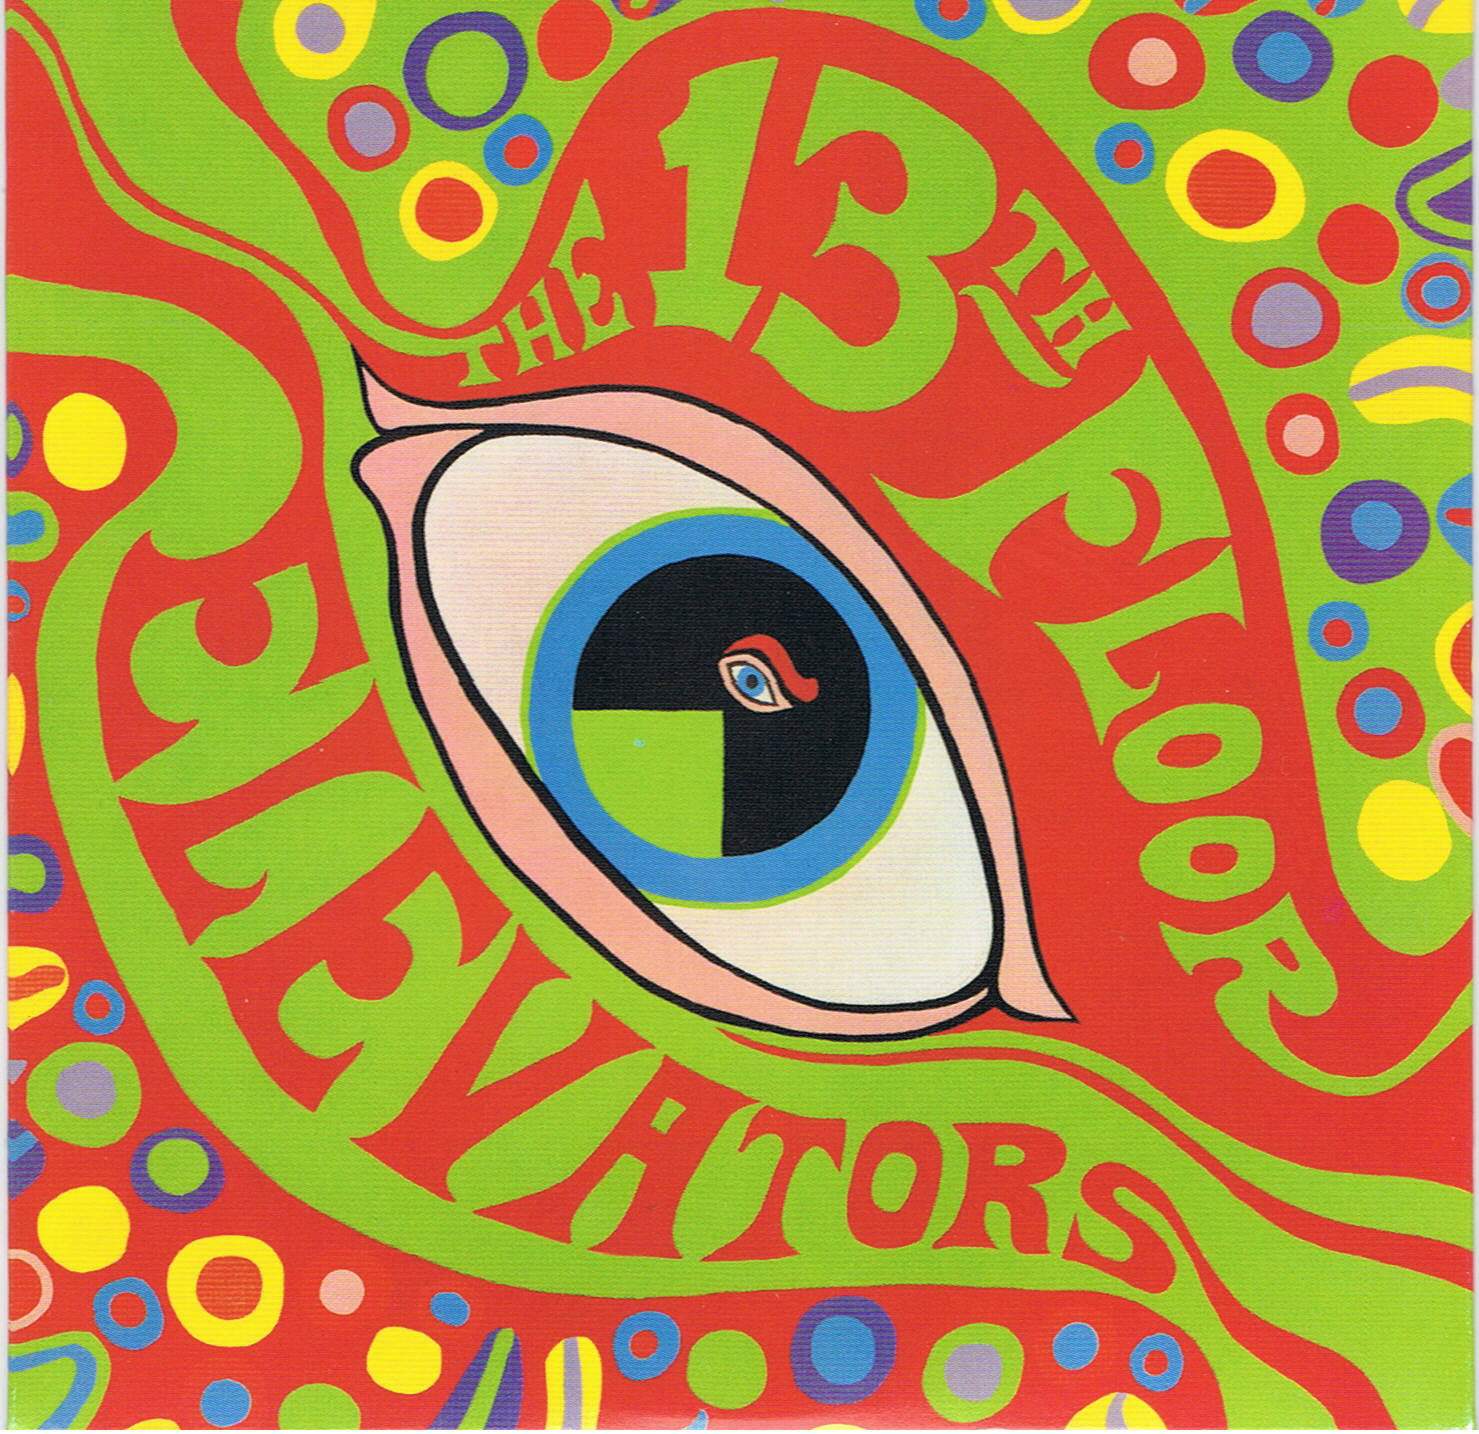 The 13th Floor Elevators - The Psychedelic Sounds of the 13th Floor Elevators